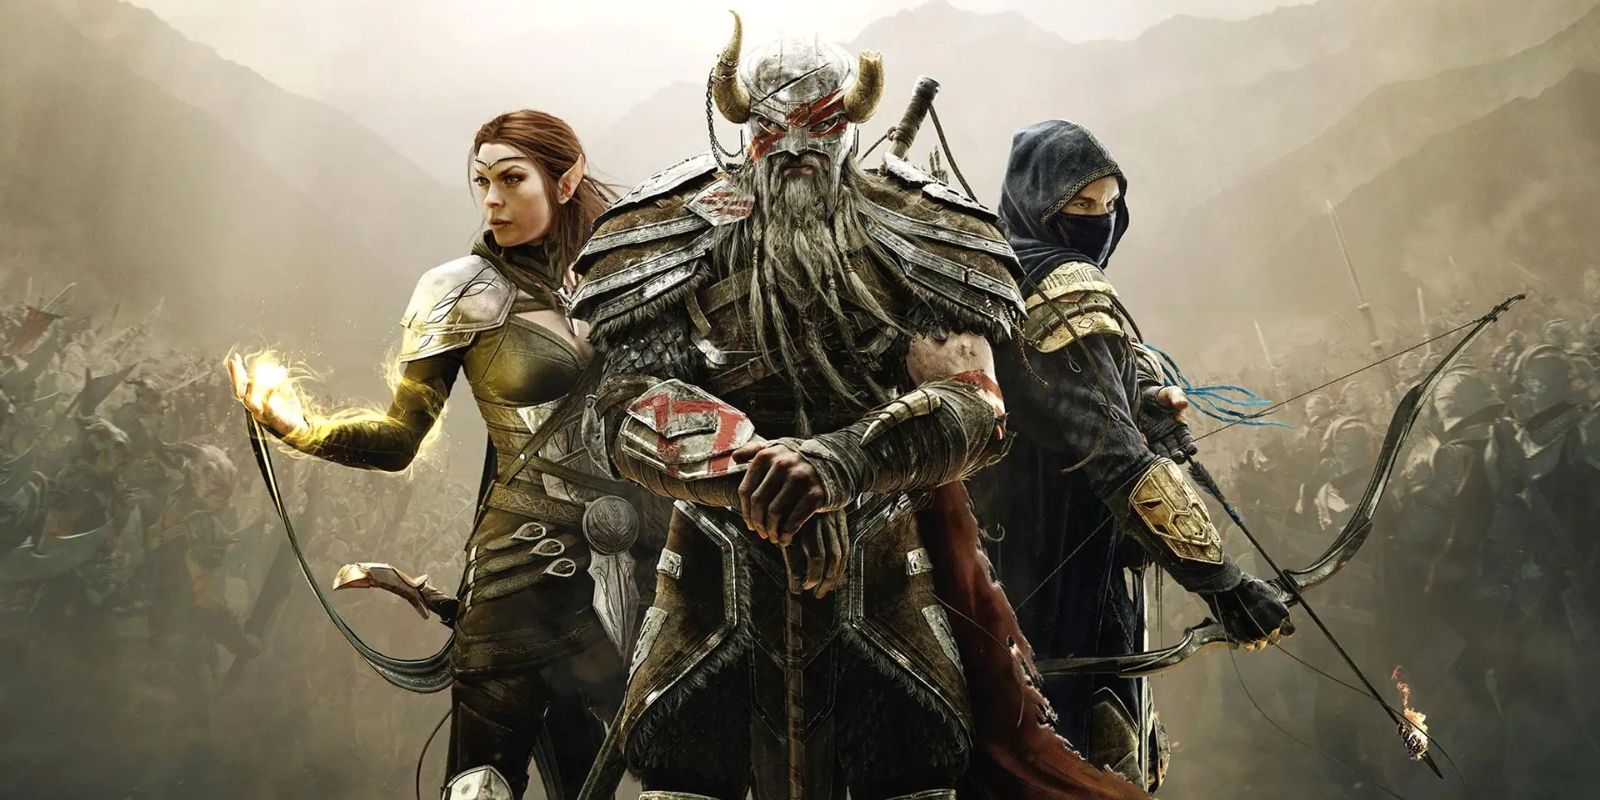 Featured image for an article titled "10 Times Elder Scrolls Games Broke Their Own Rules"; An image of promotional art for Elder Scrolls Online.